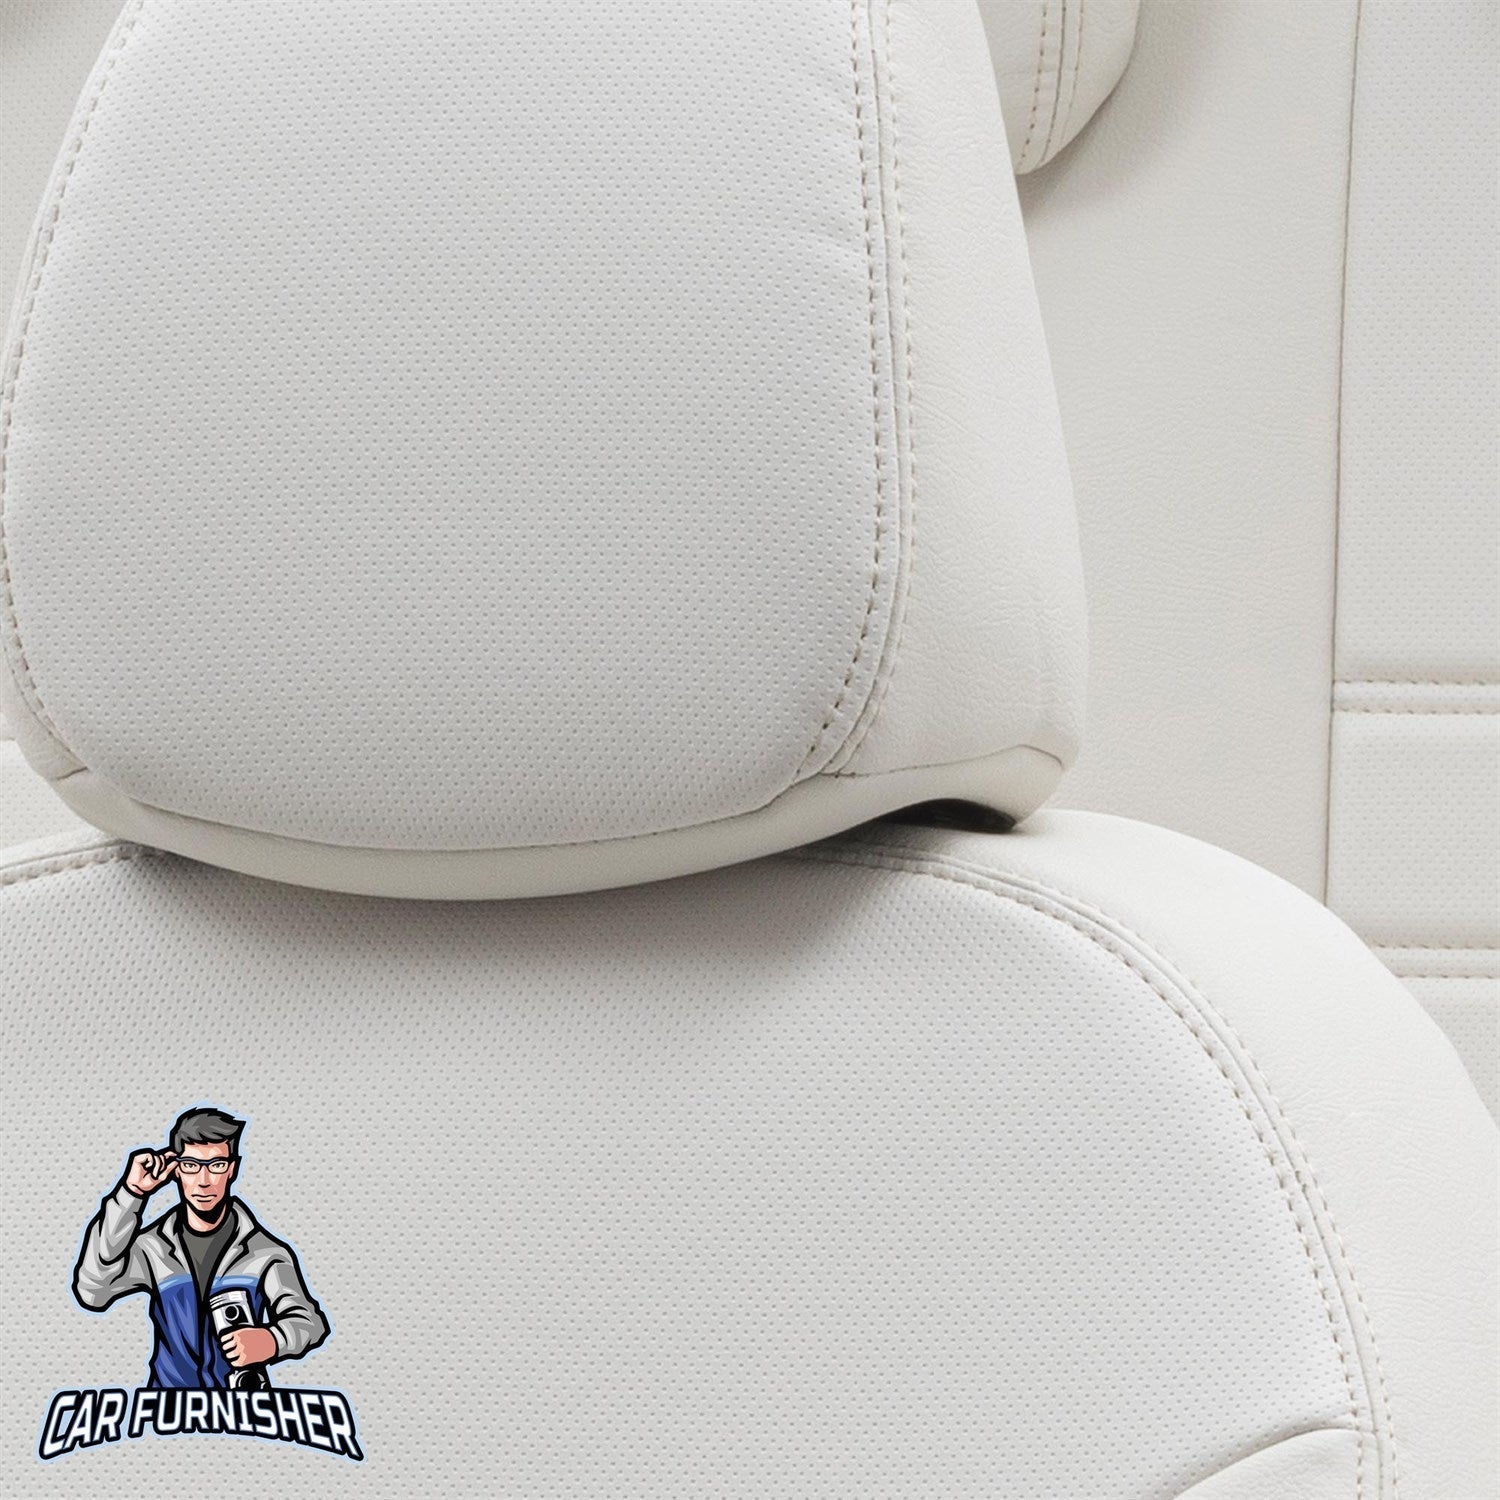 Seat Exeo Seat Covers Istanbul Leather Design Ivory Leather